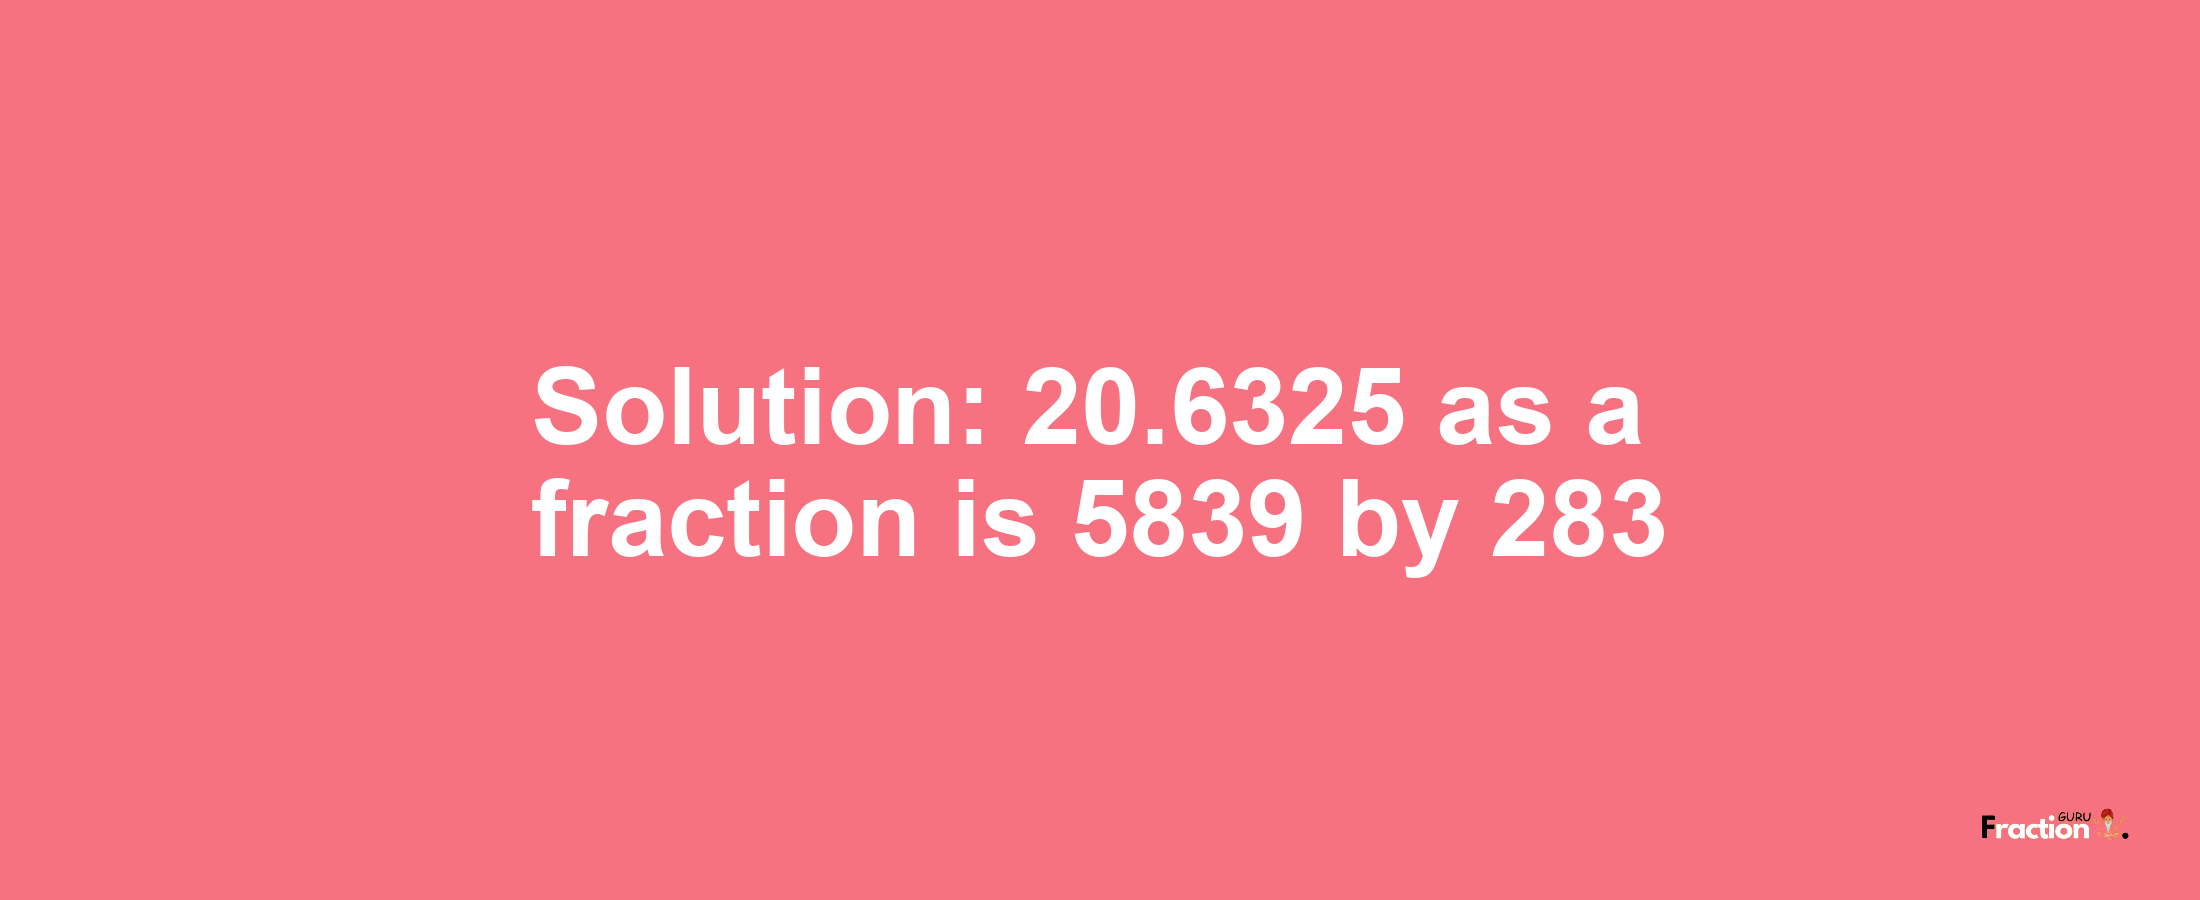 Solution:20.6325 as a fraction is 5839/283